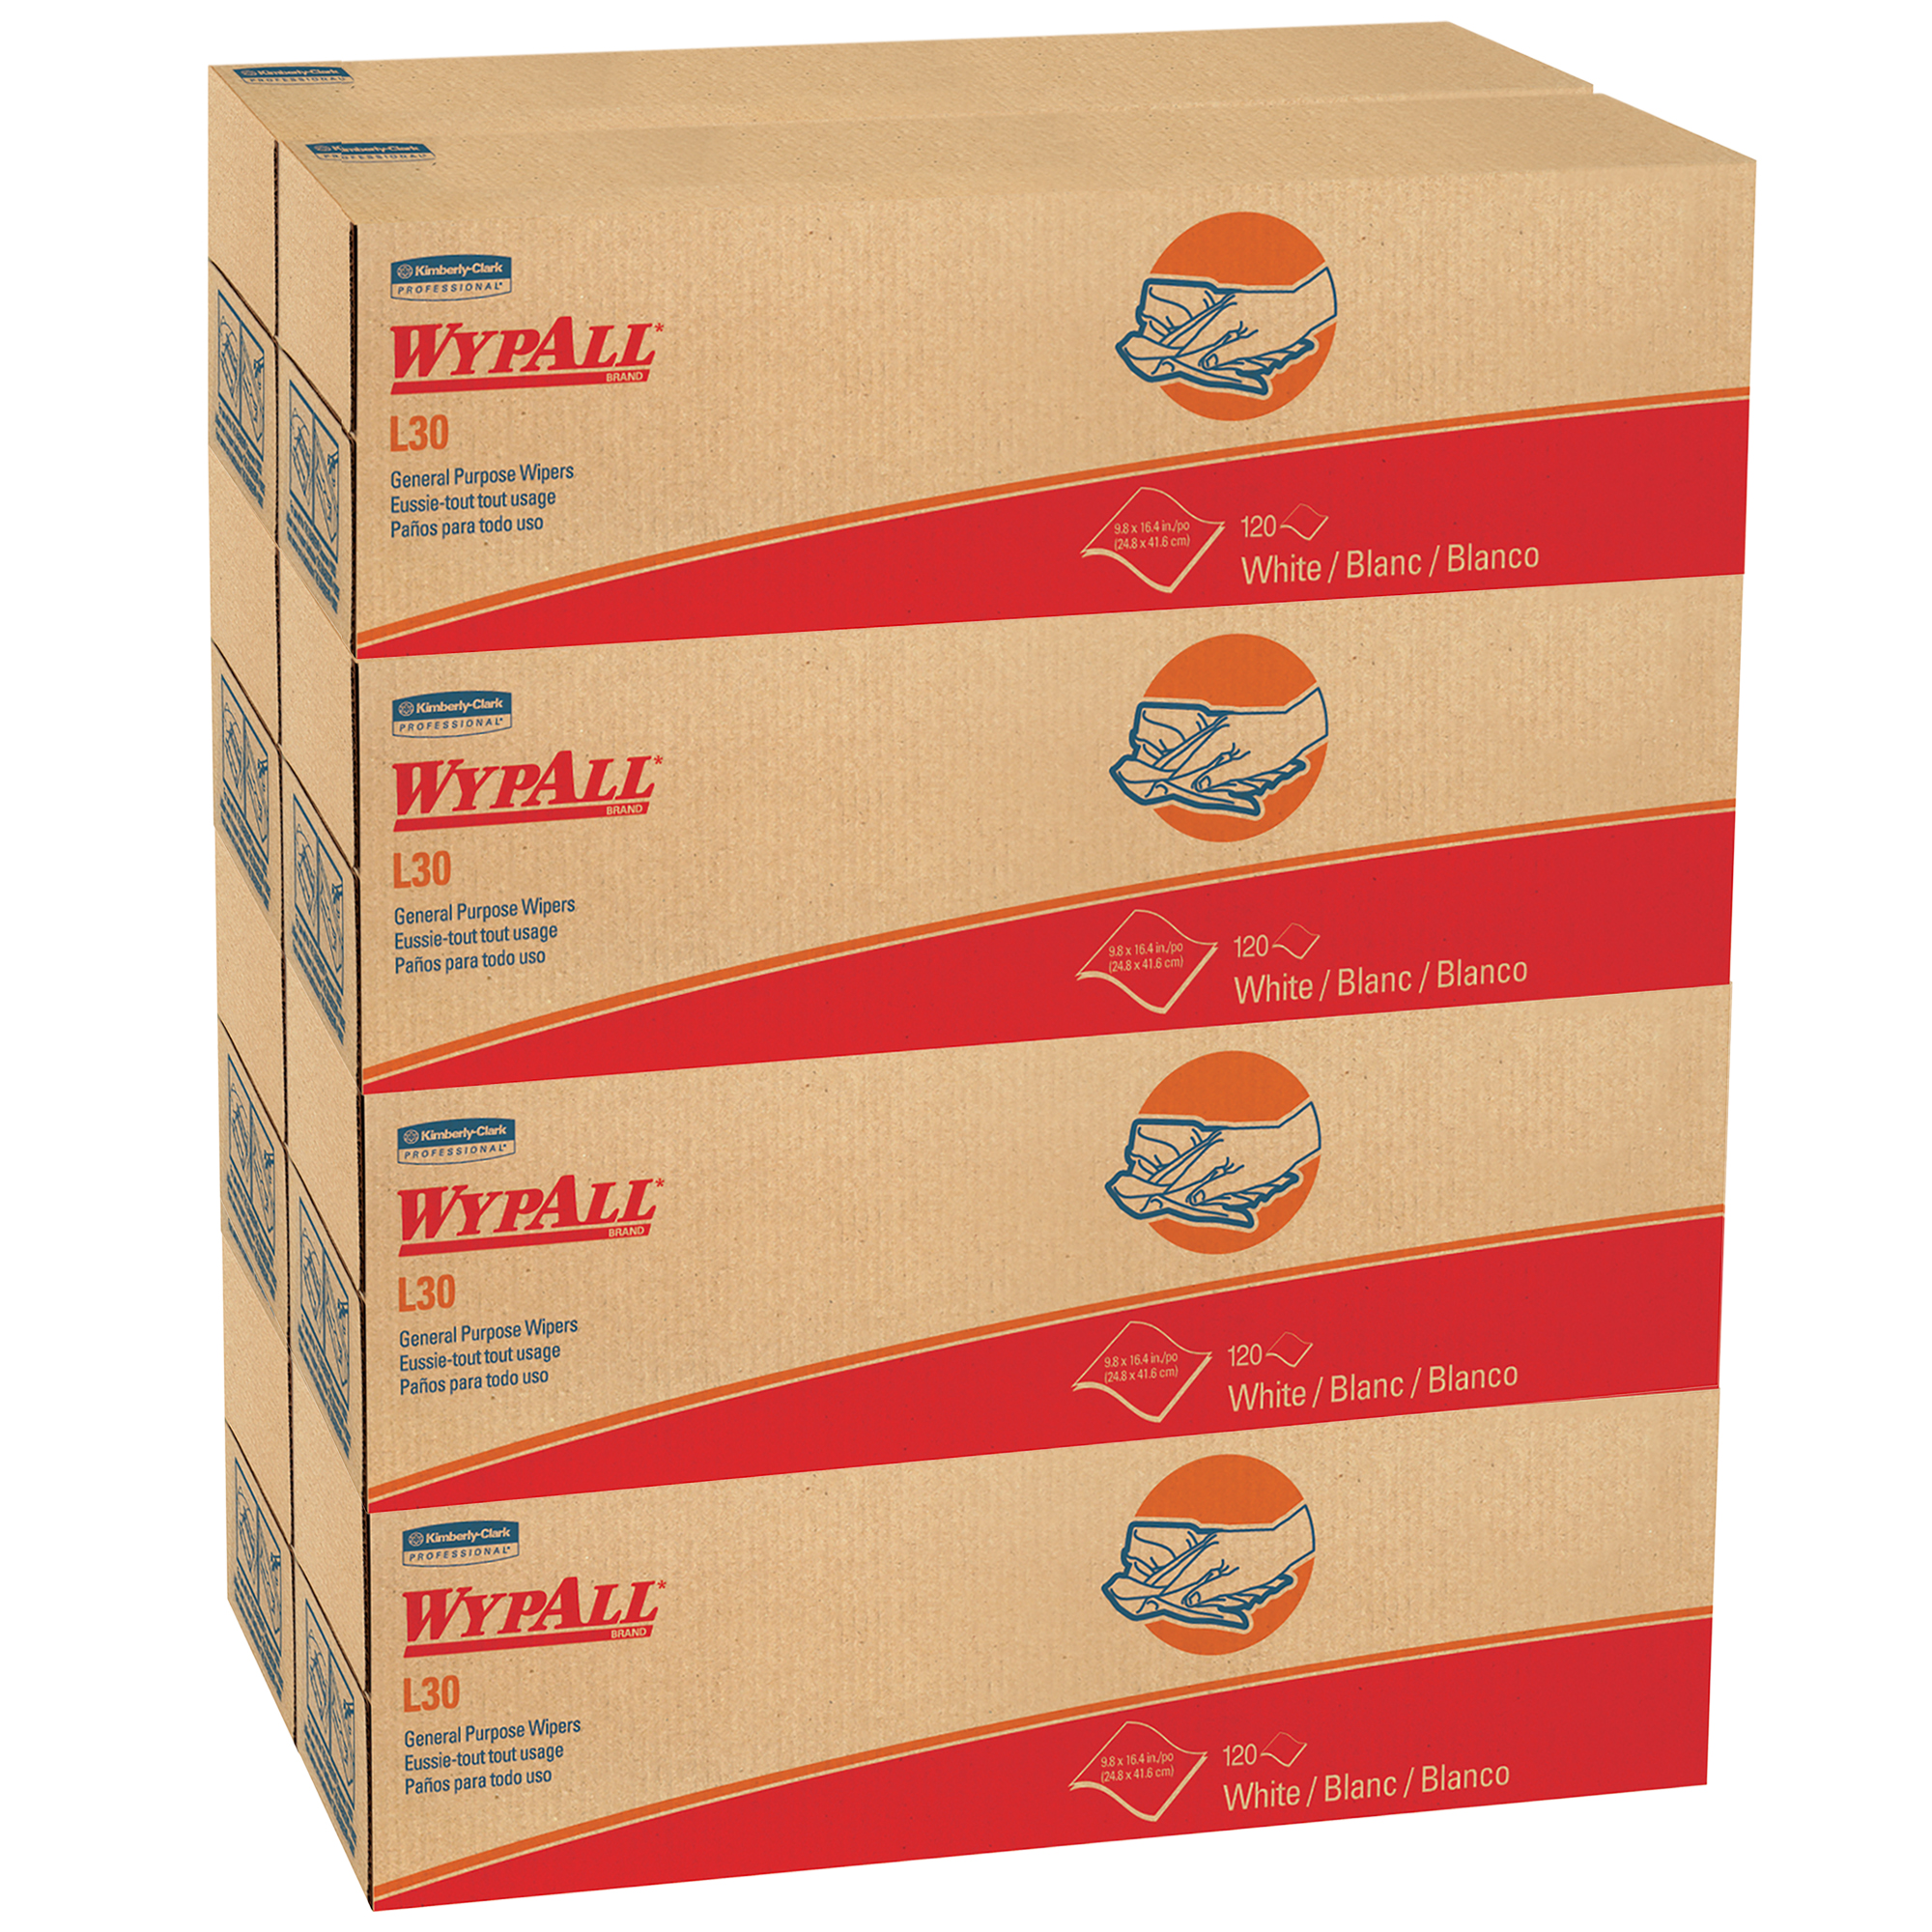 Picture of L30 Wipers, POP-UP Box, 9 4/5 x 16 2/5, 100/Box, 8 Boxes/Carton